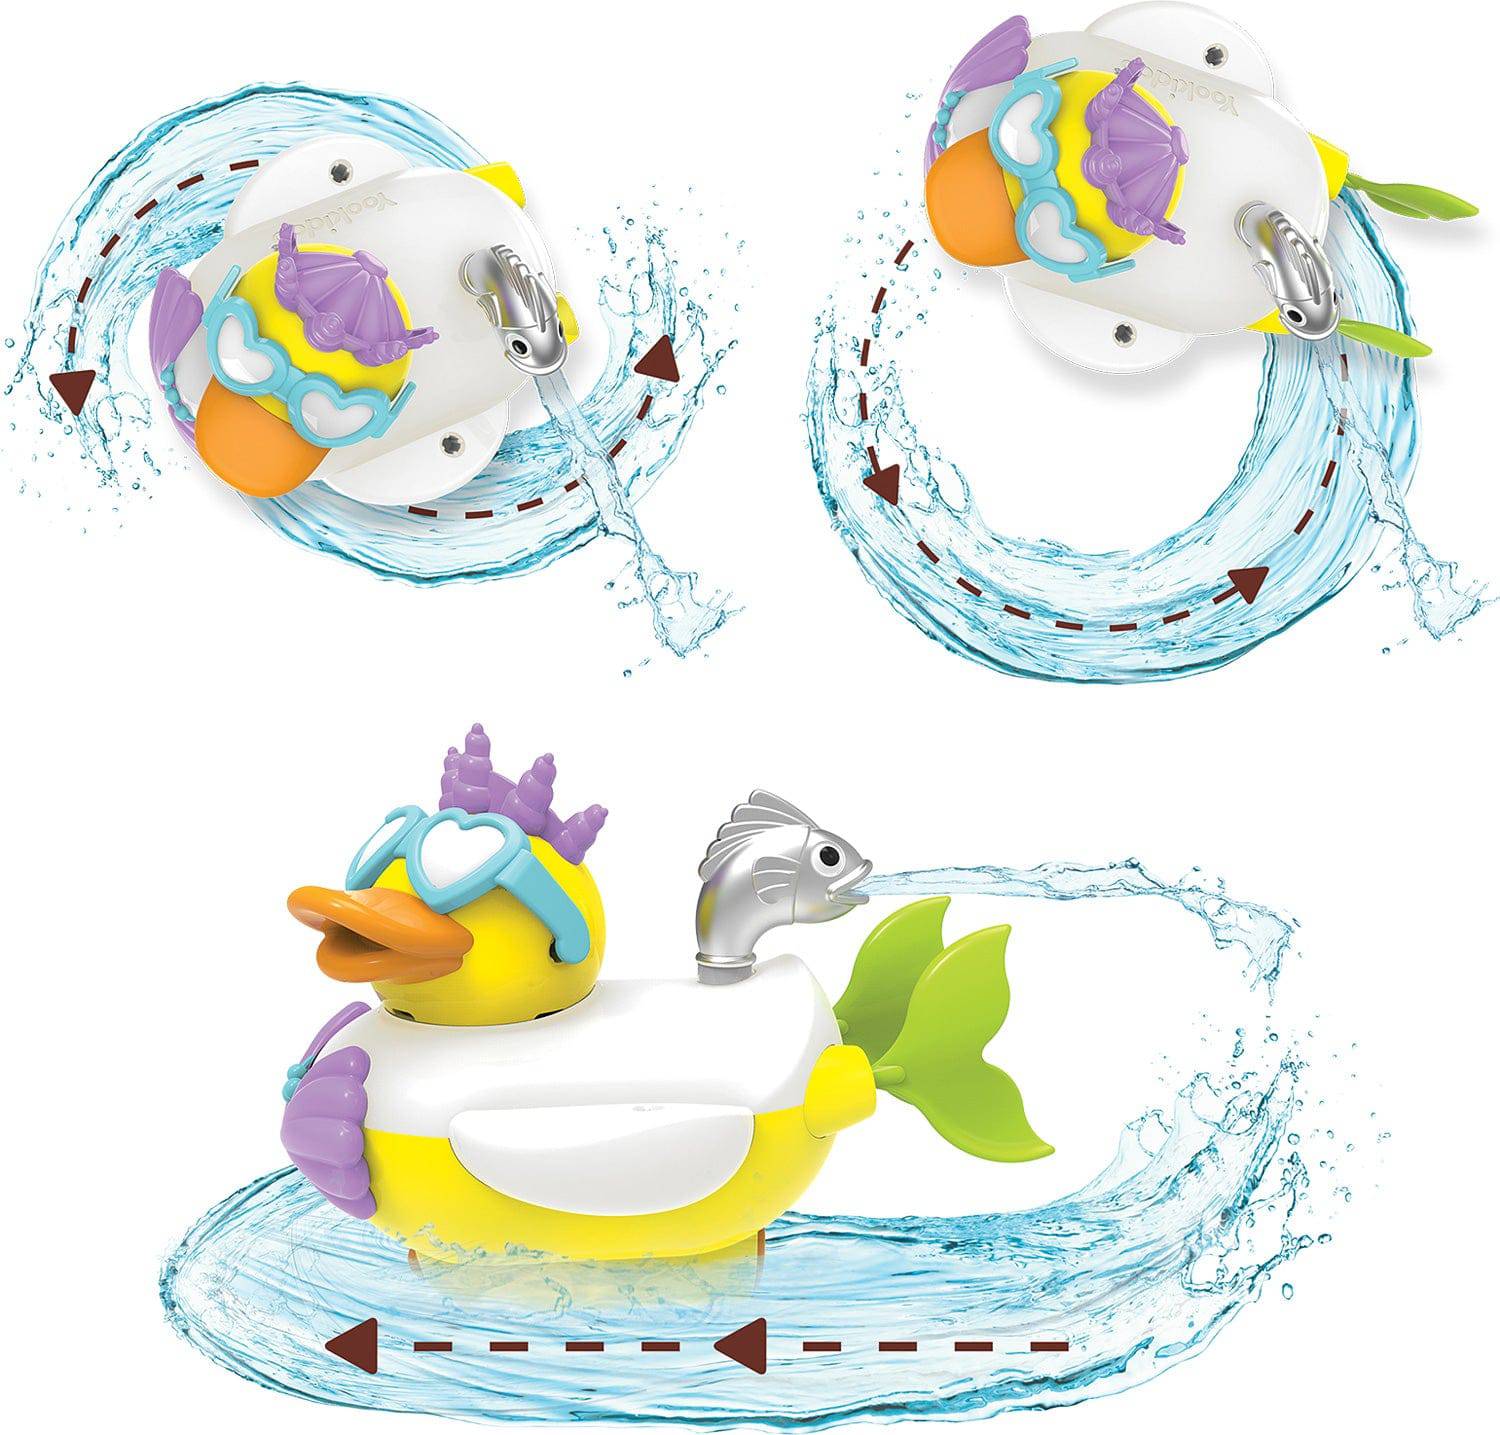 Jet Duck - Create A Mermaid - A Child's Delight